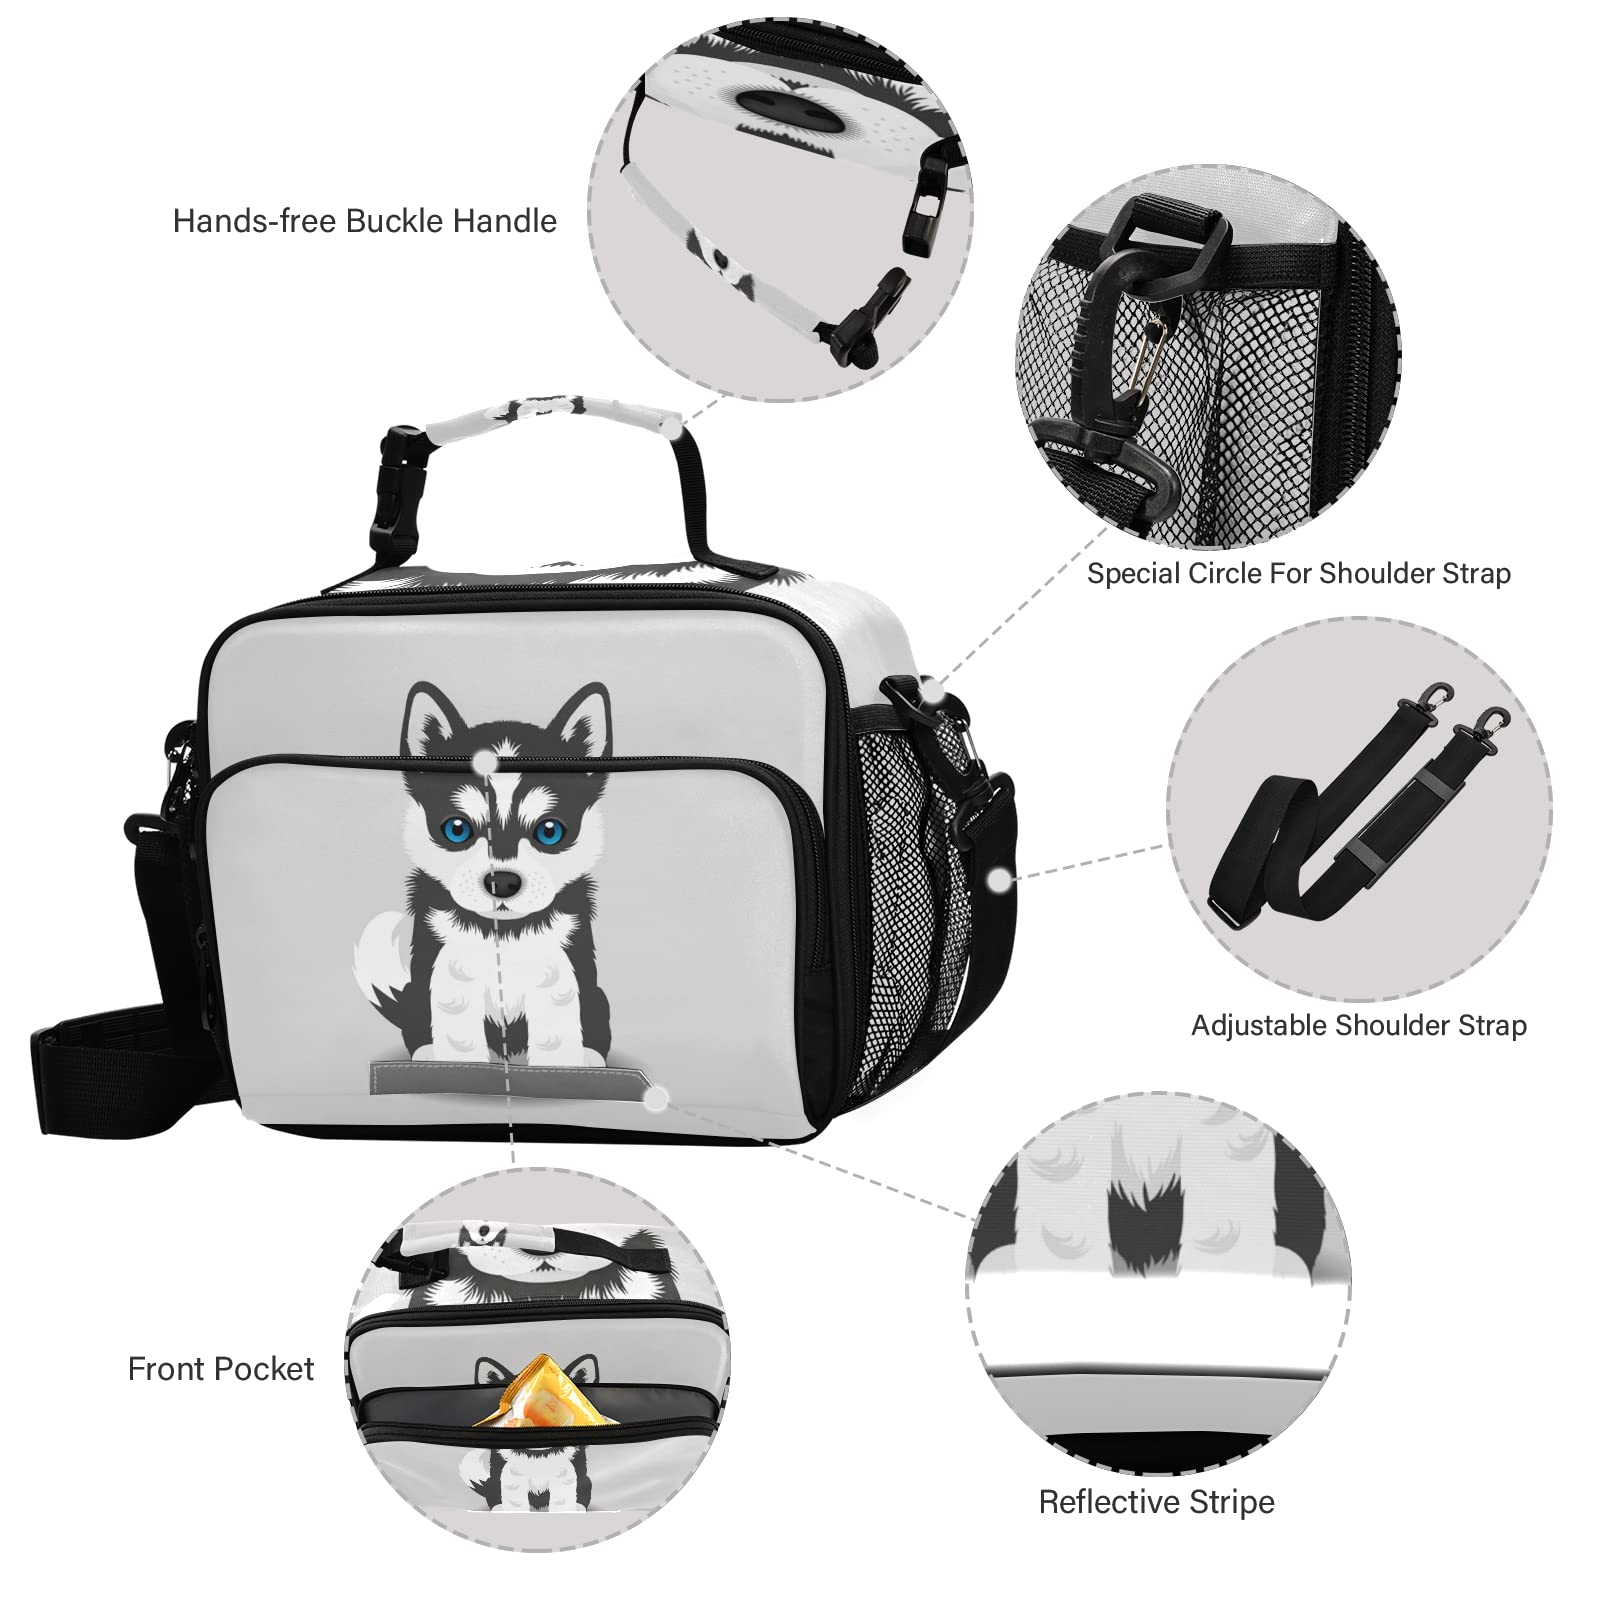 Pfrewn Dog Lunch Box for Kids Adults Siberian Husky Puppy Insulated Lunch Bag with Shoulder Strap Reusable Cooler Bags Lunch Tote for Office School Girls Boys Teens